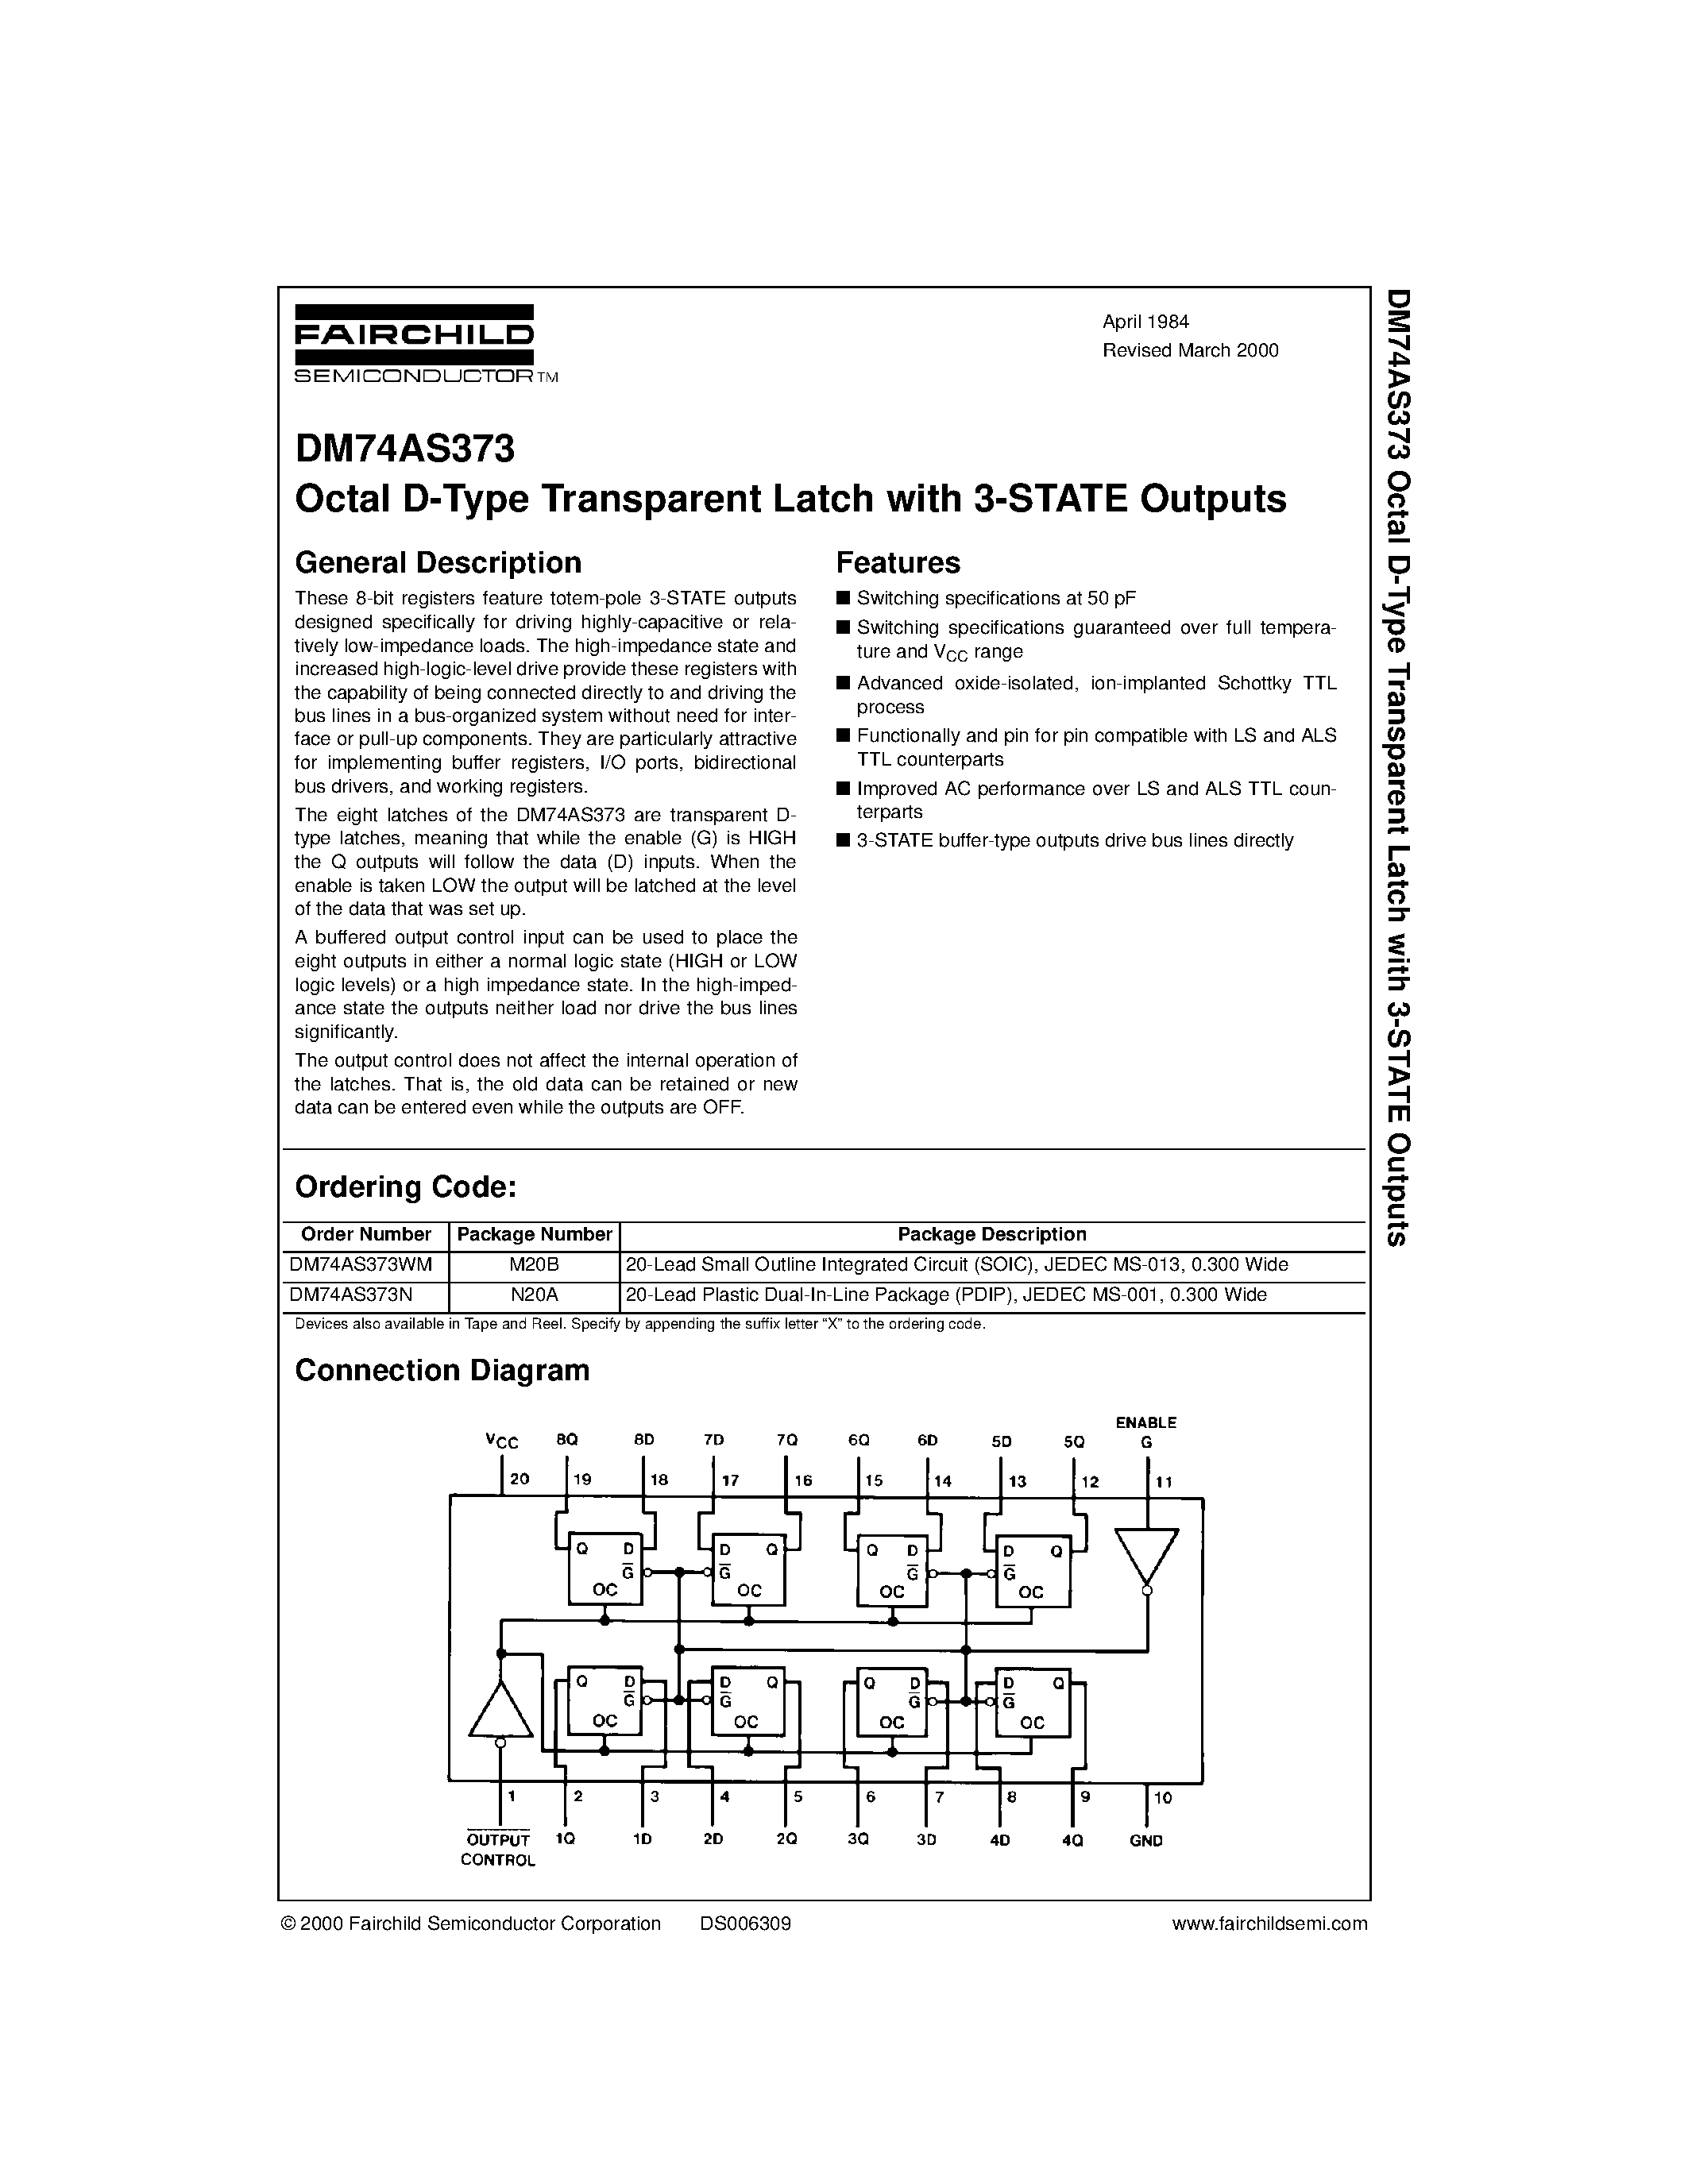 Datasheet DM74AS373WM - Octal D-Type Transparent Latch with 3-STATE Outputs page 1